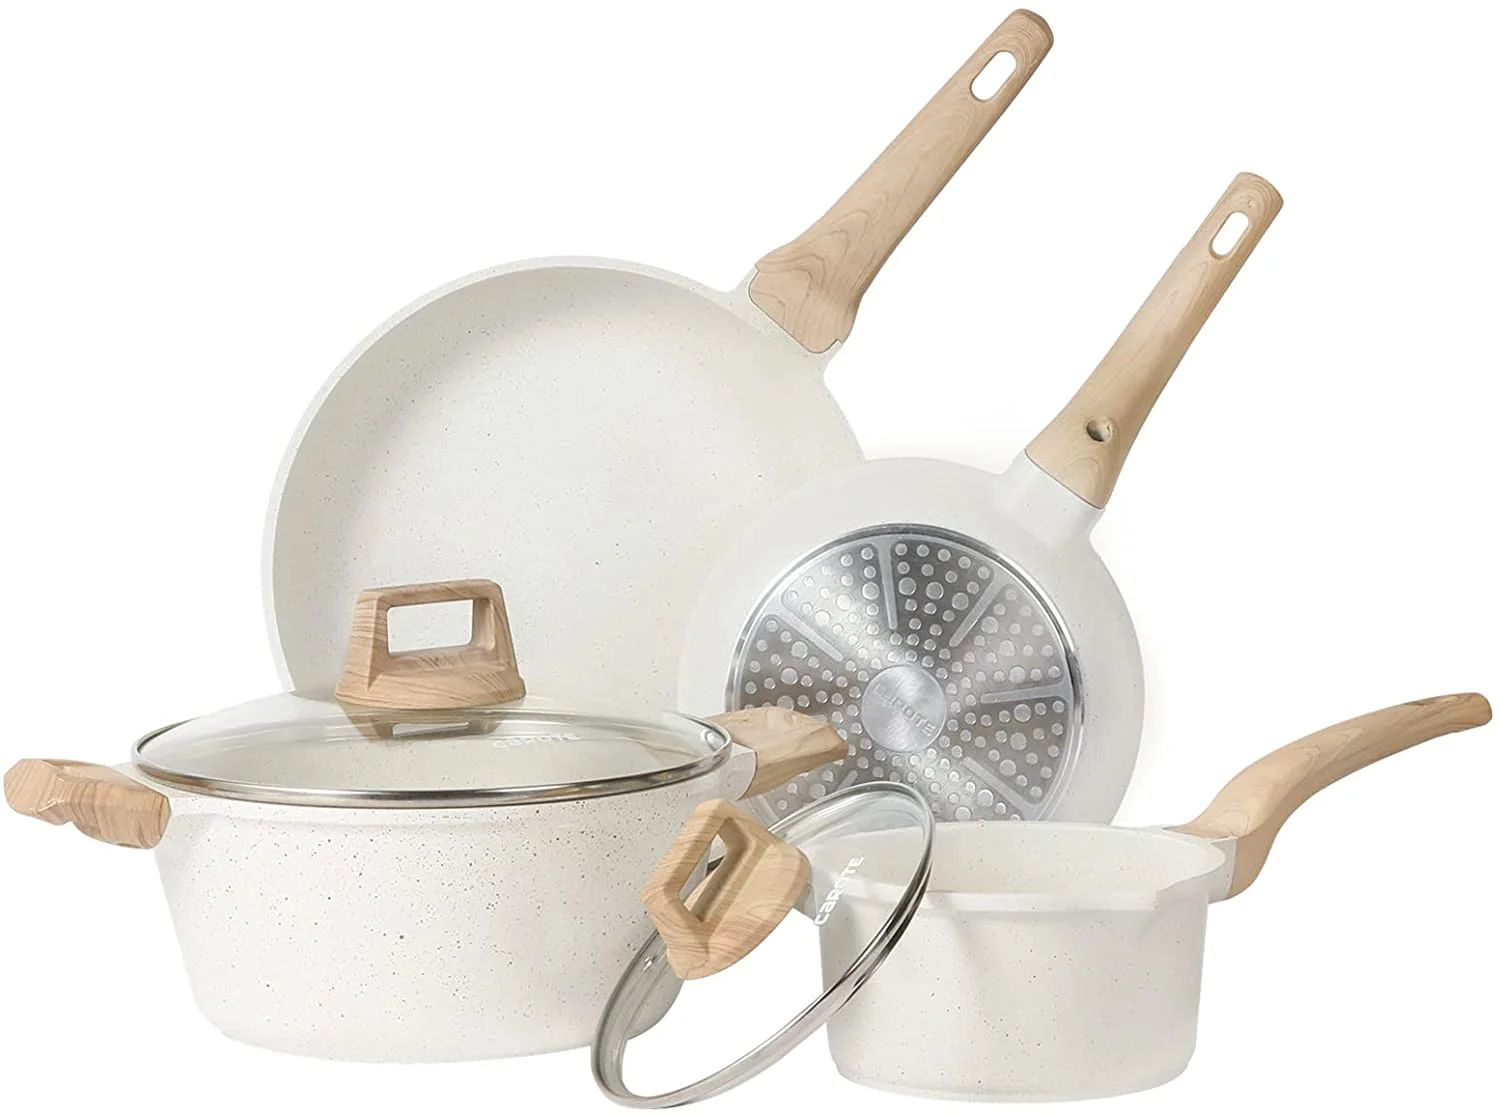 Carote 6 Piece White Granite Pots and Pans Set, Nonstick Cookware Set,Easy Care | Walmart (US)